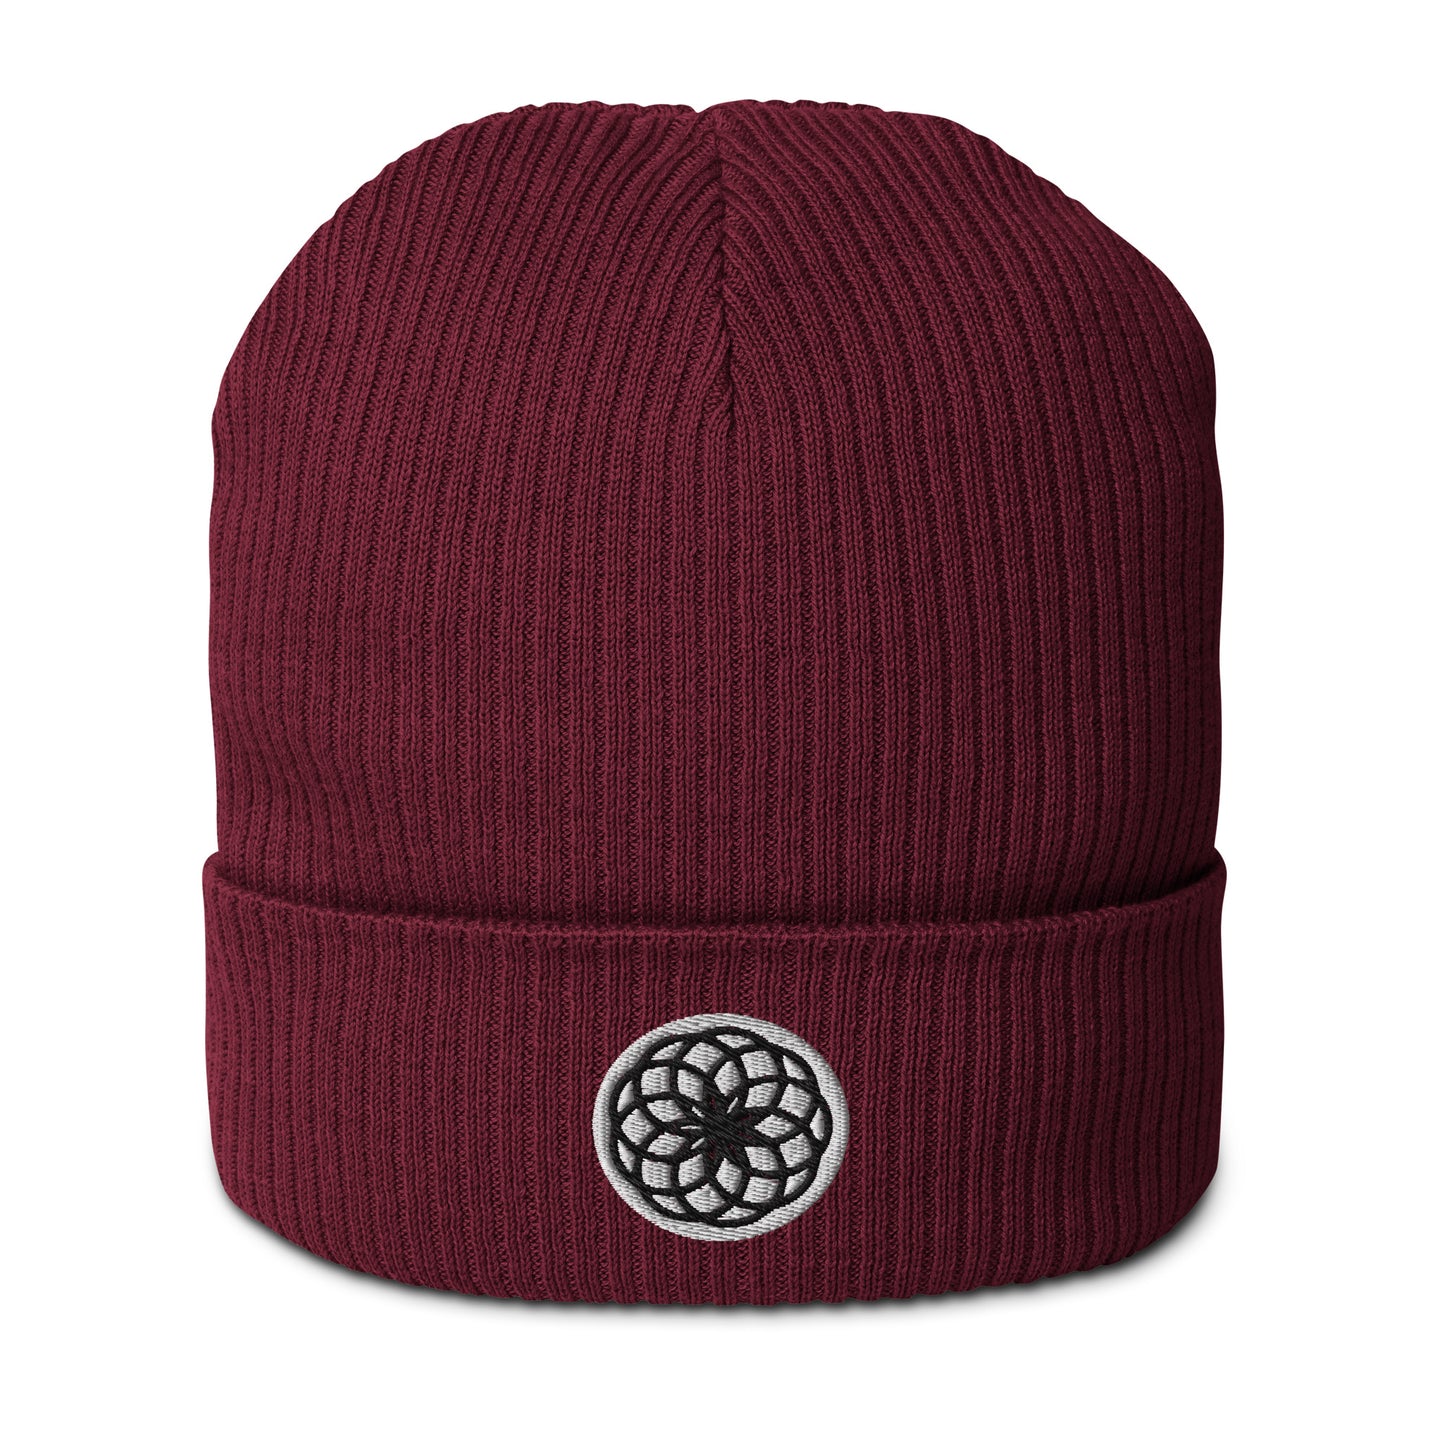 Check out our Organic Cotton Lotus of Life Beanie in Wine Red. Made from organic cotton and featuring a Lotus of Life embroidery, it's not your average hat. It's about purity, growth, and embracing life. Plus, it's made of breathable and lightweight natural fabric, so you can stay comfy wherever your journey takes you. Grab one and add a laid-back, high vibe touch to your style.